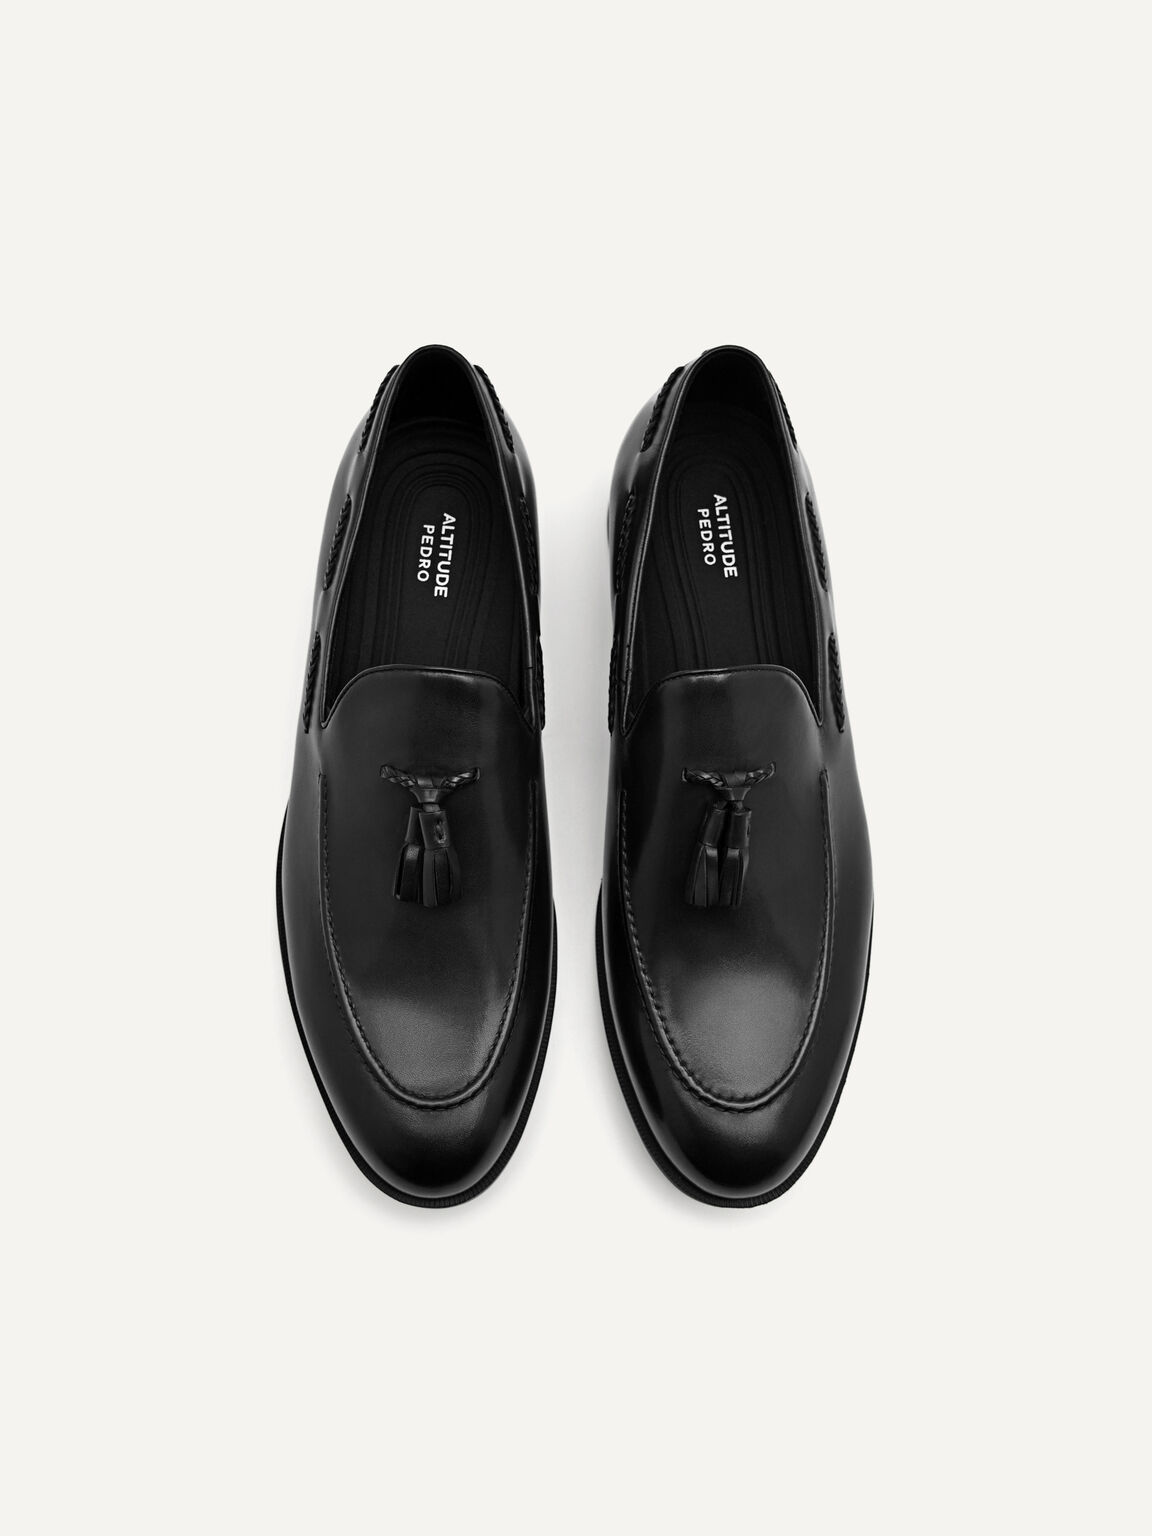 Monk Leather Loafers, Black